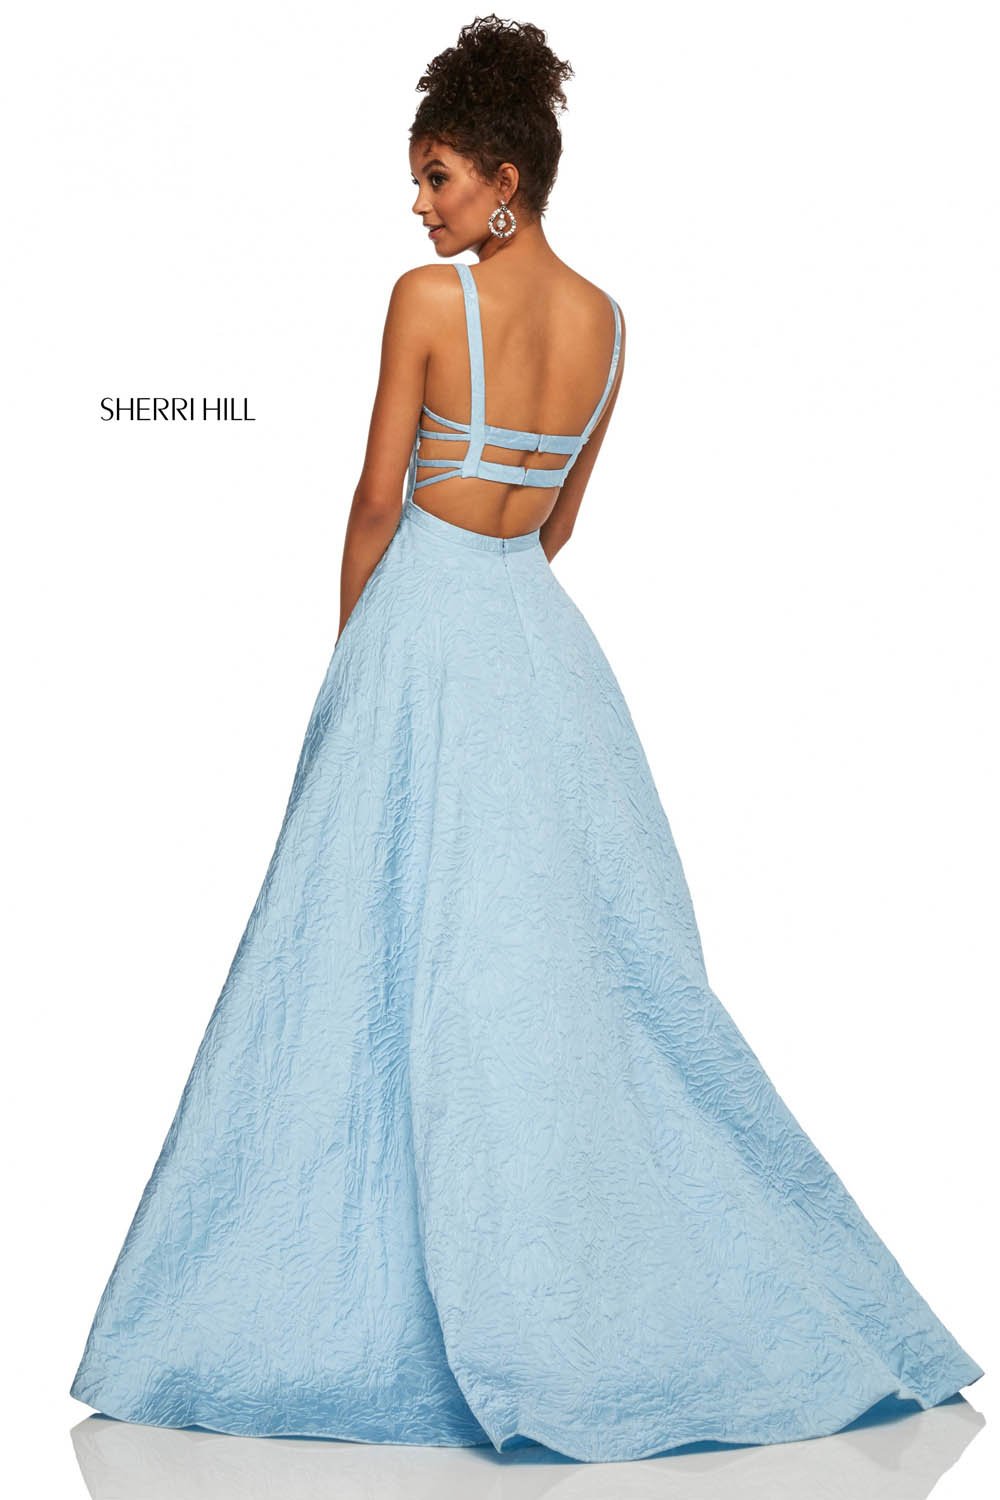 Sherri Hill 52503 dress images in these colors: Light Blue.